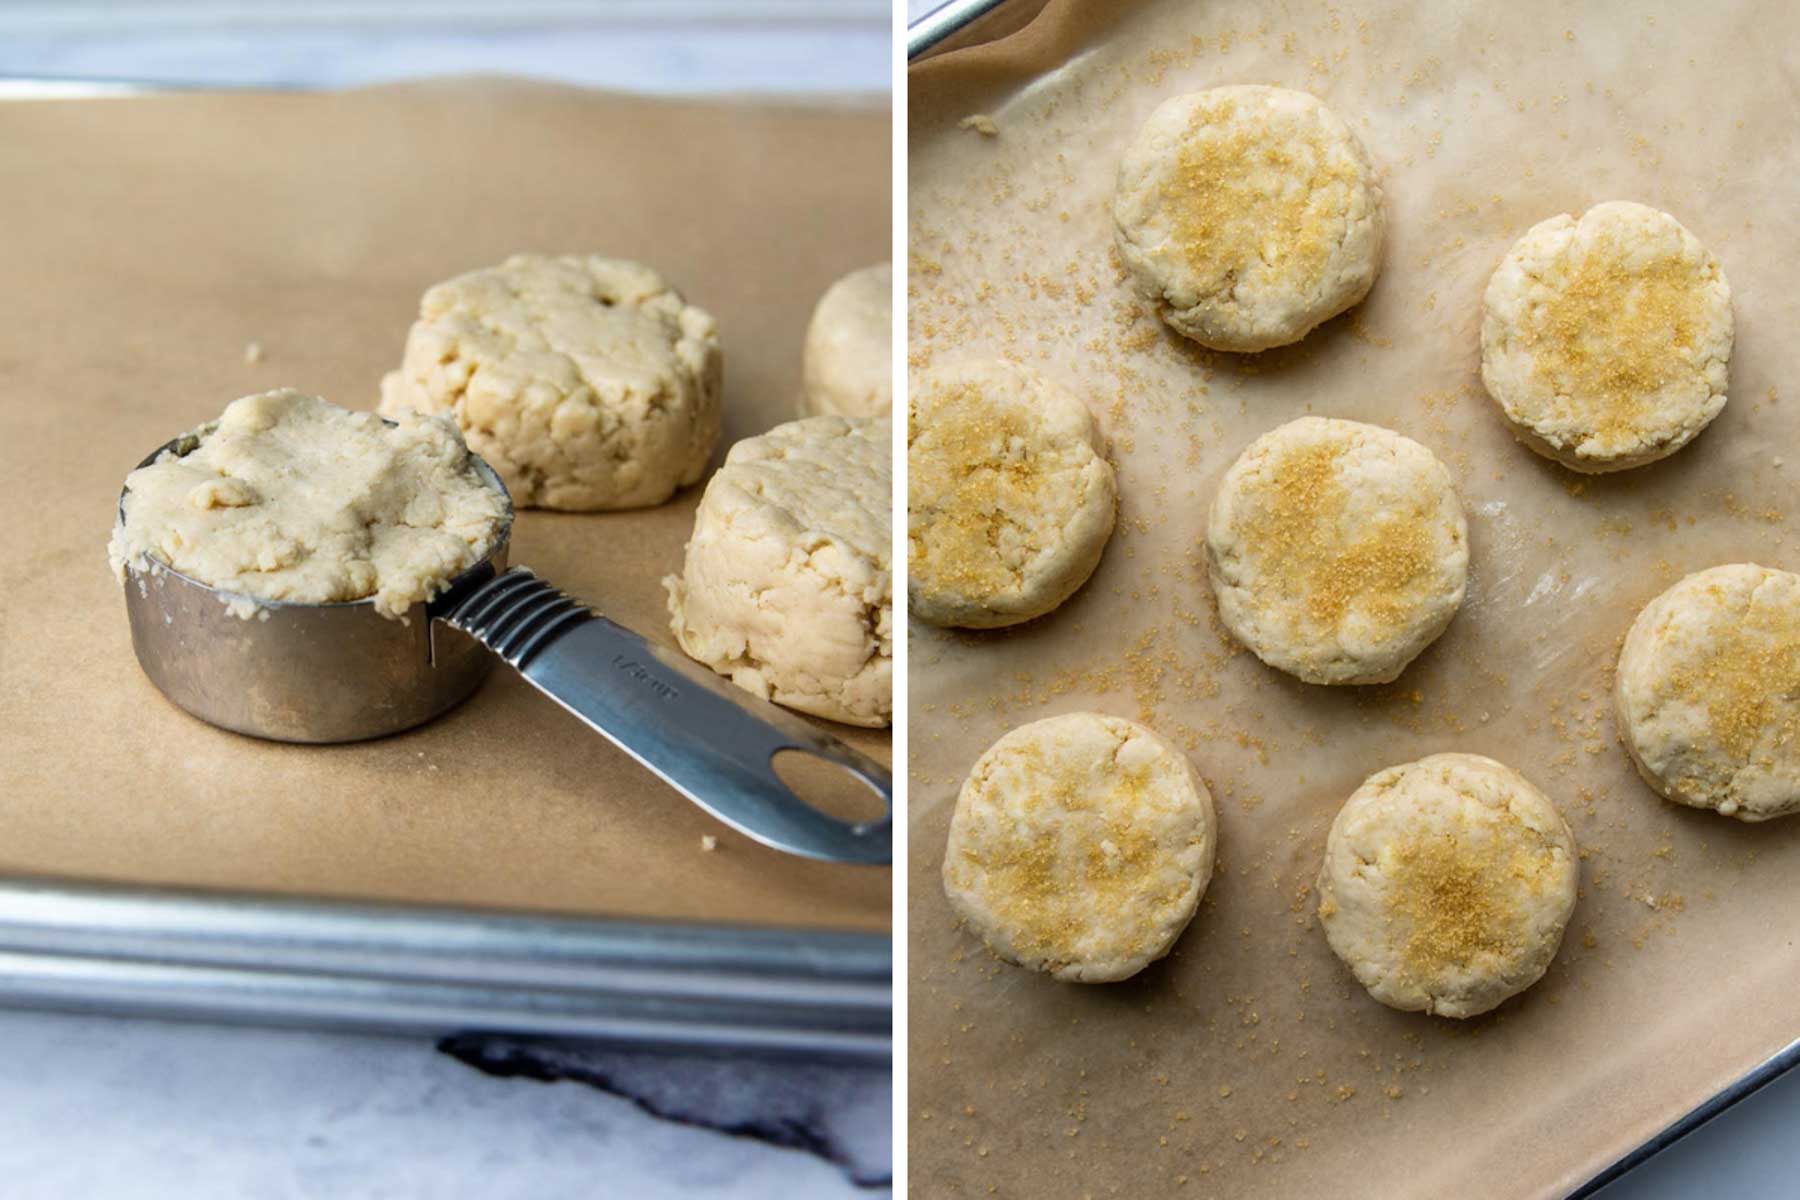 images showing how to shape and drop the biscuits on a baking sheet